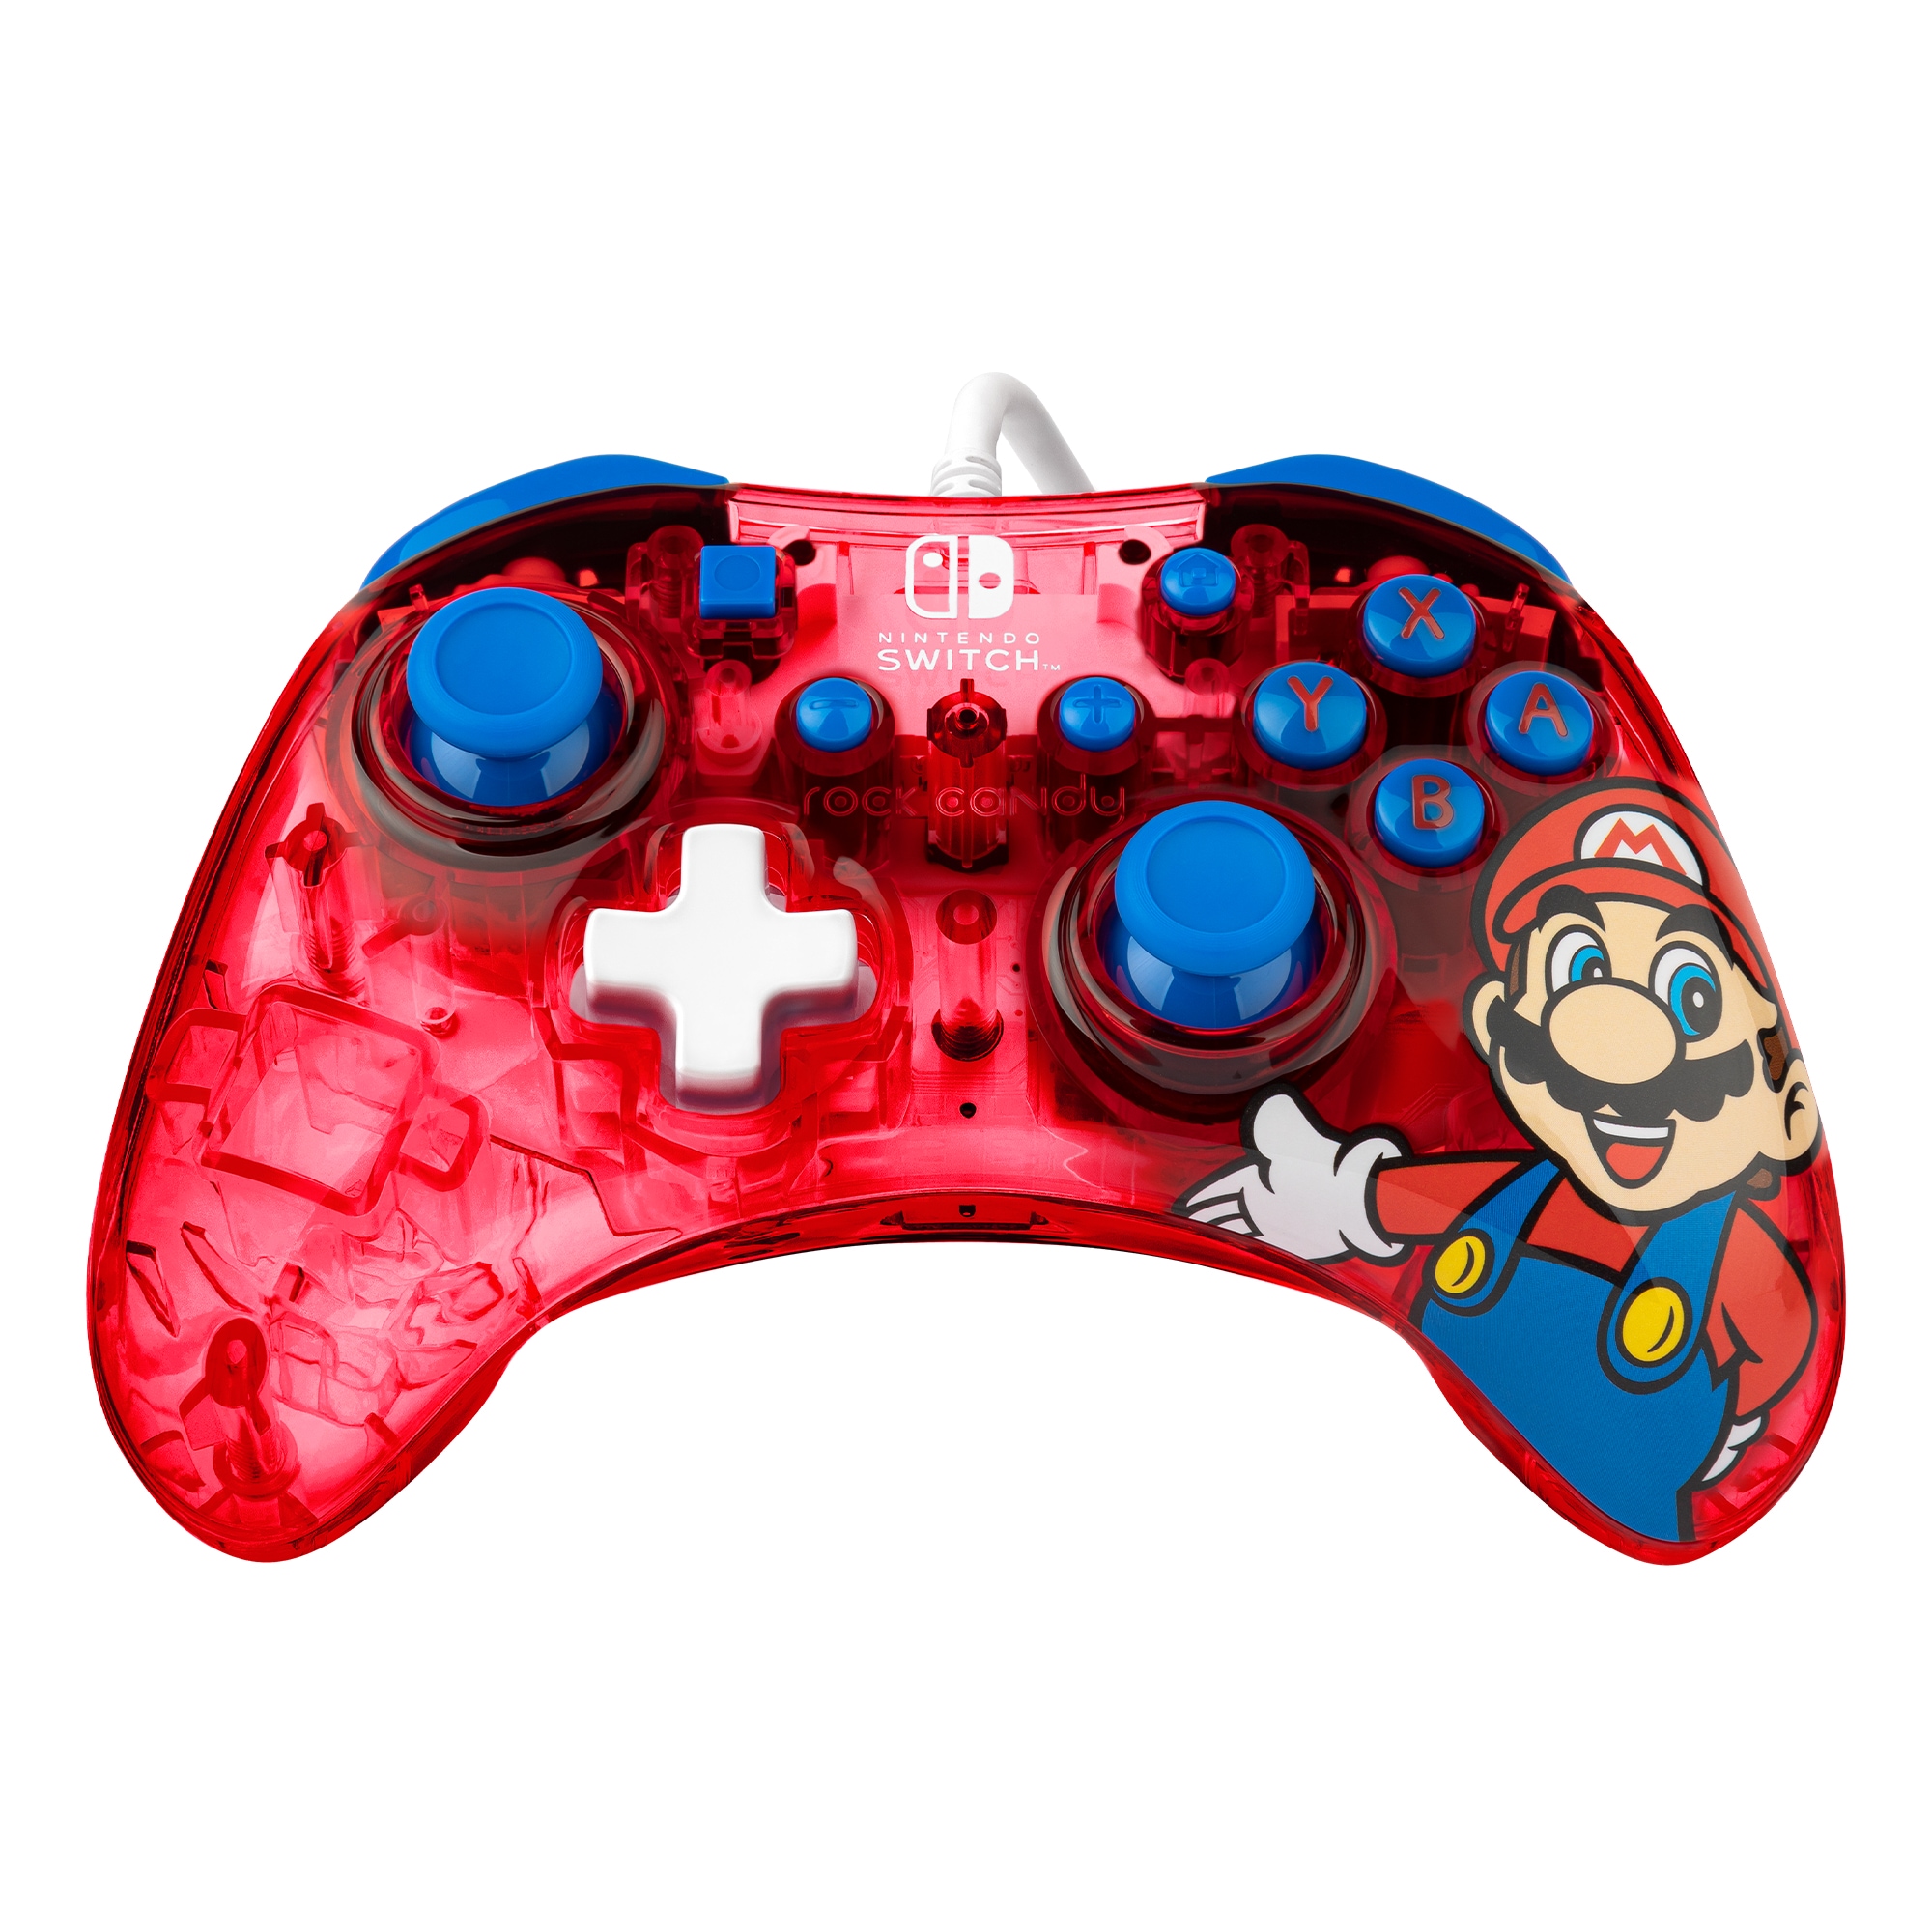 PDP - Performance Designed Products Gamepad »Rock Candy Mini Stormin Cherry Switch«